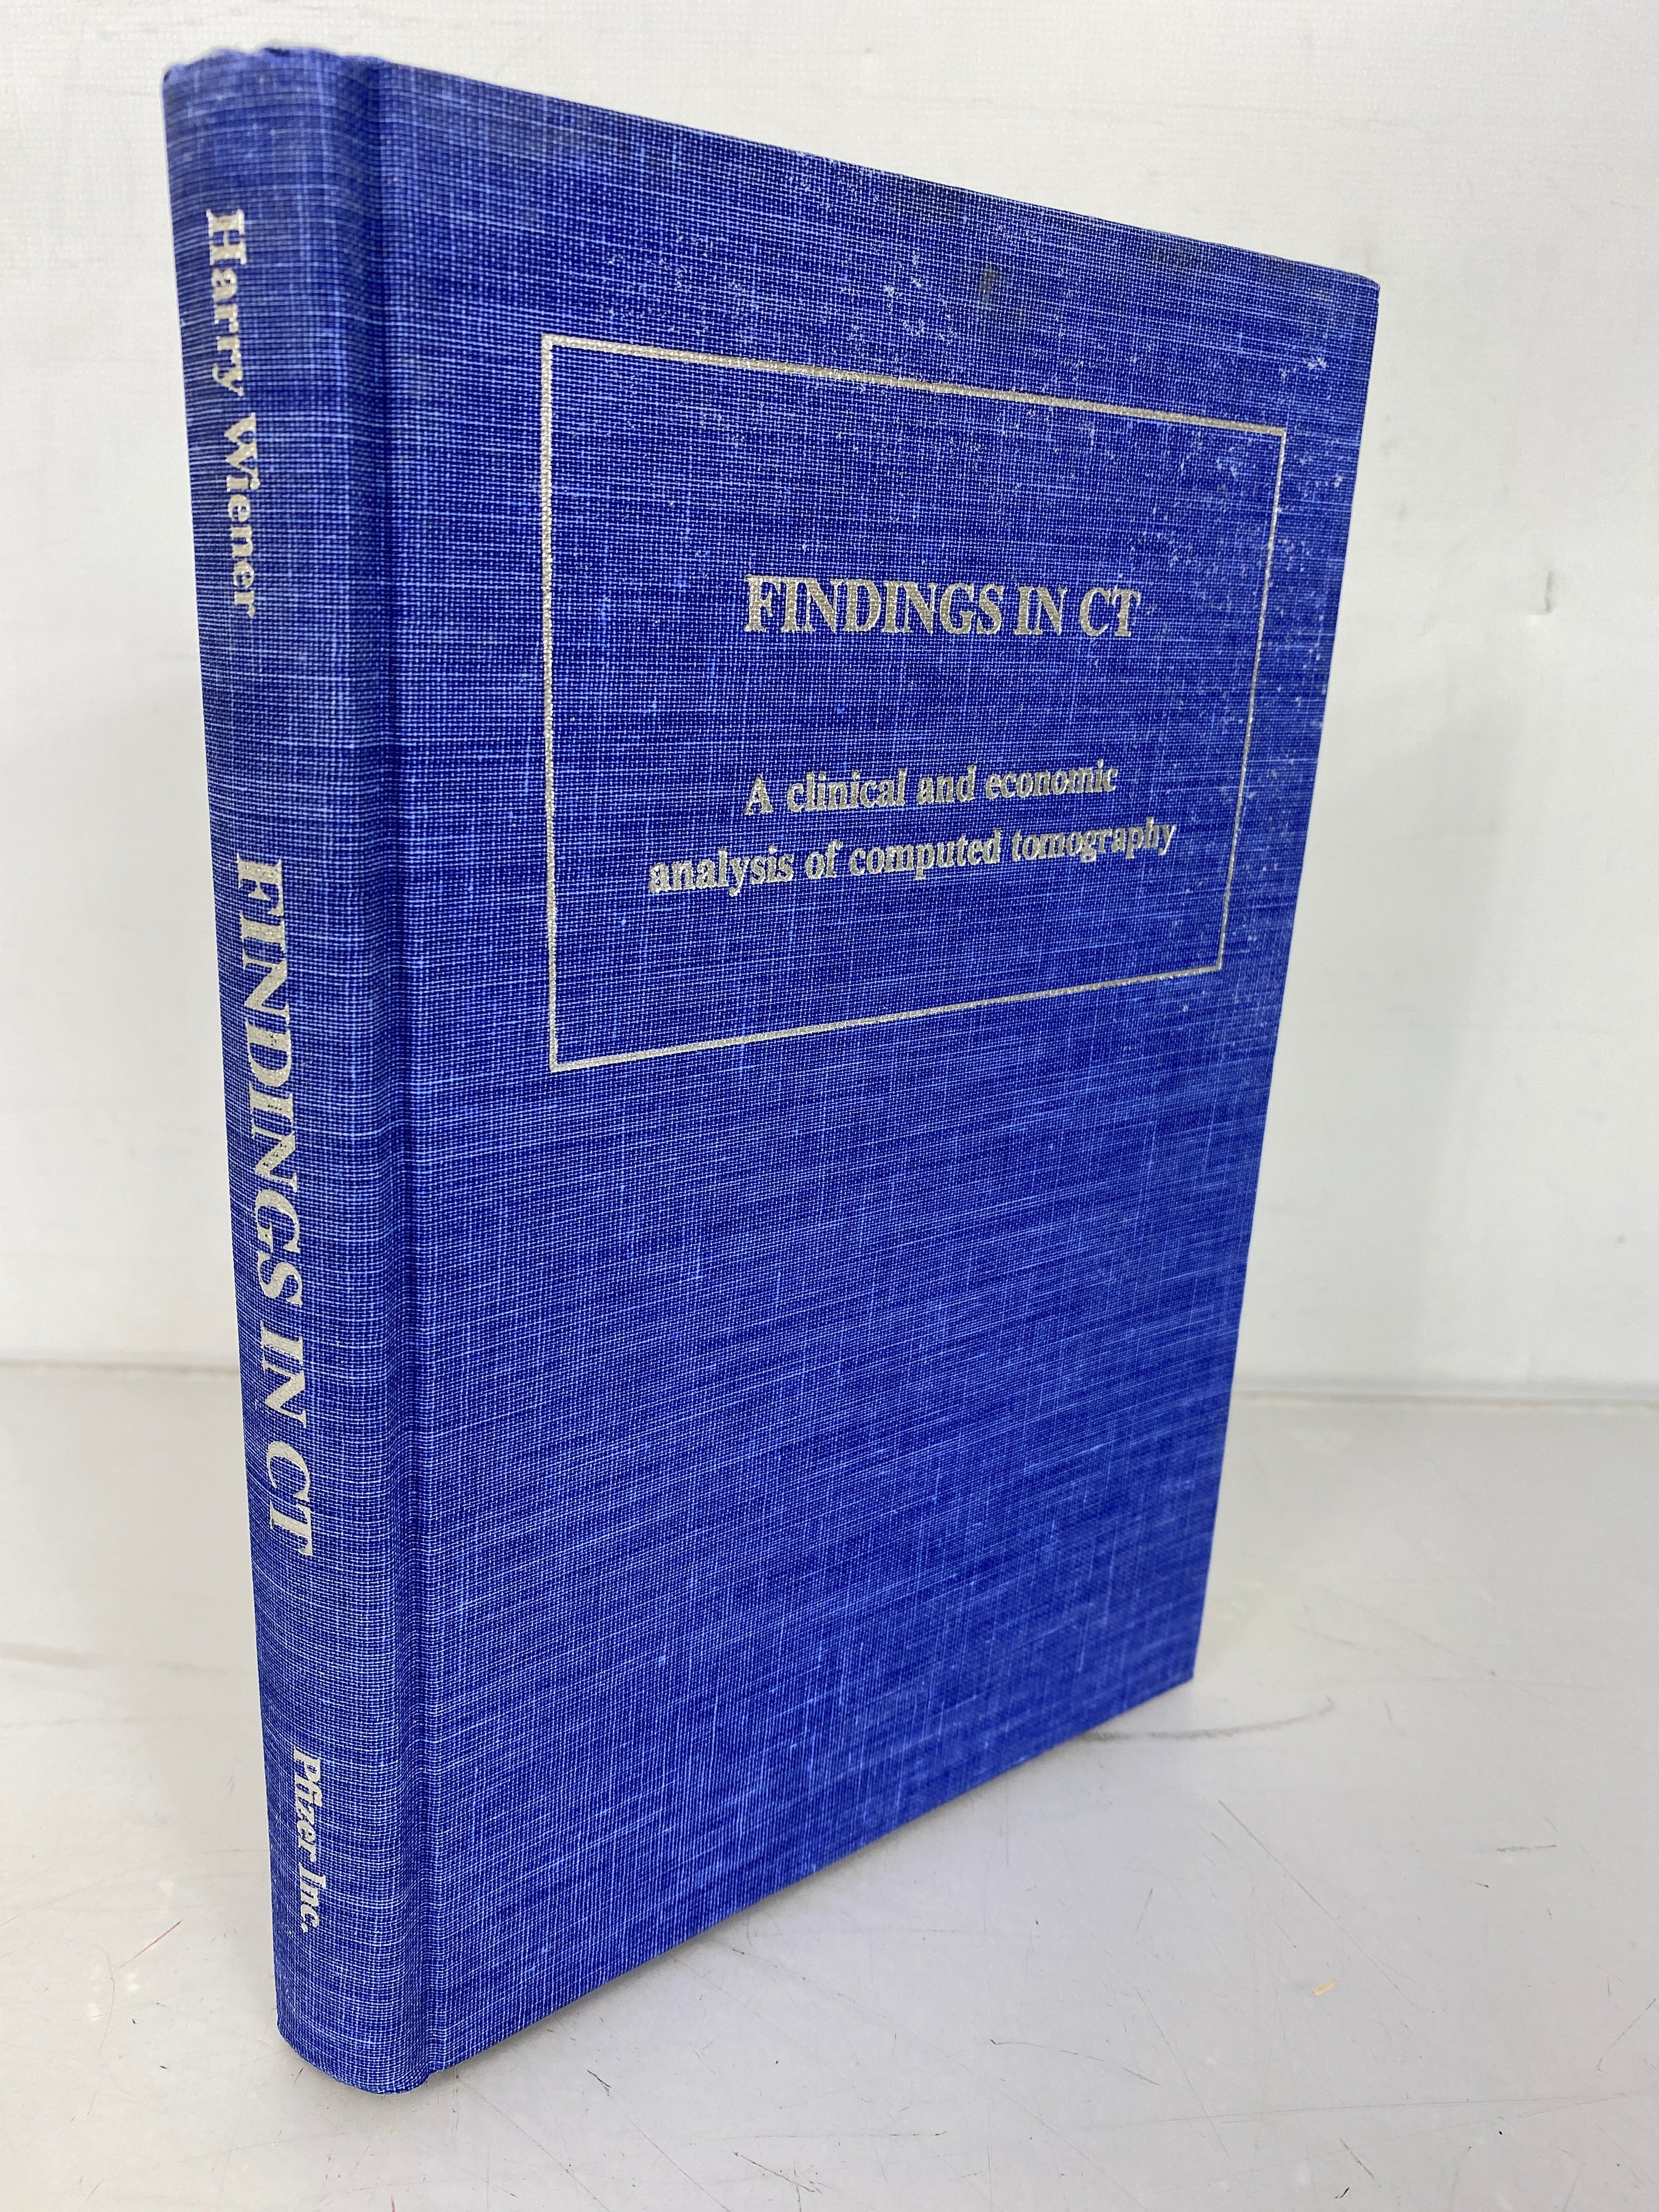 Findings in CT: A Clinical and Economic Analysis of Computed Tomography Harry Wiener Pfizer, Inc First Edition 1979 HC DJ